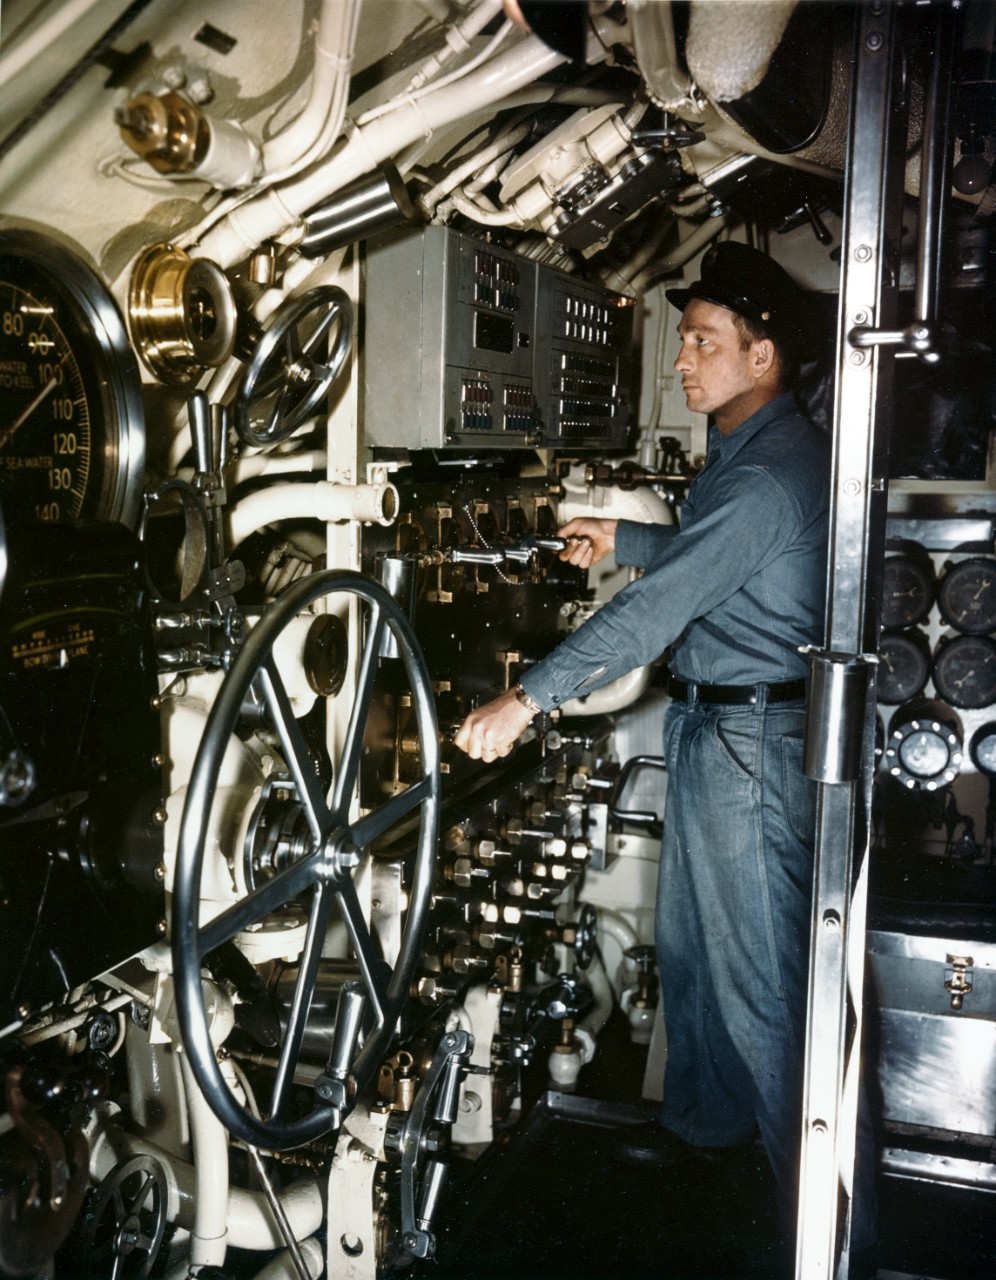 Submarine Control Station manned by a Chief Petty Officer, during World War II